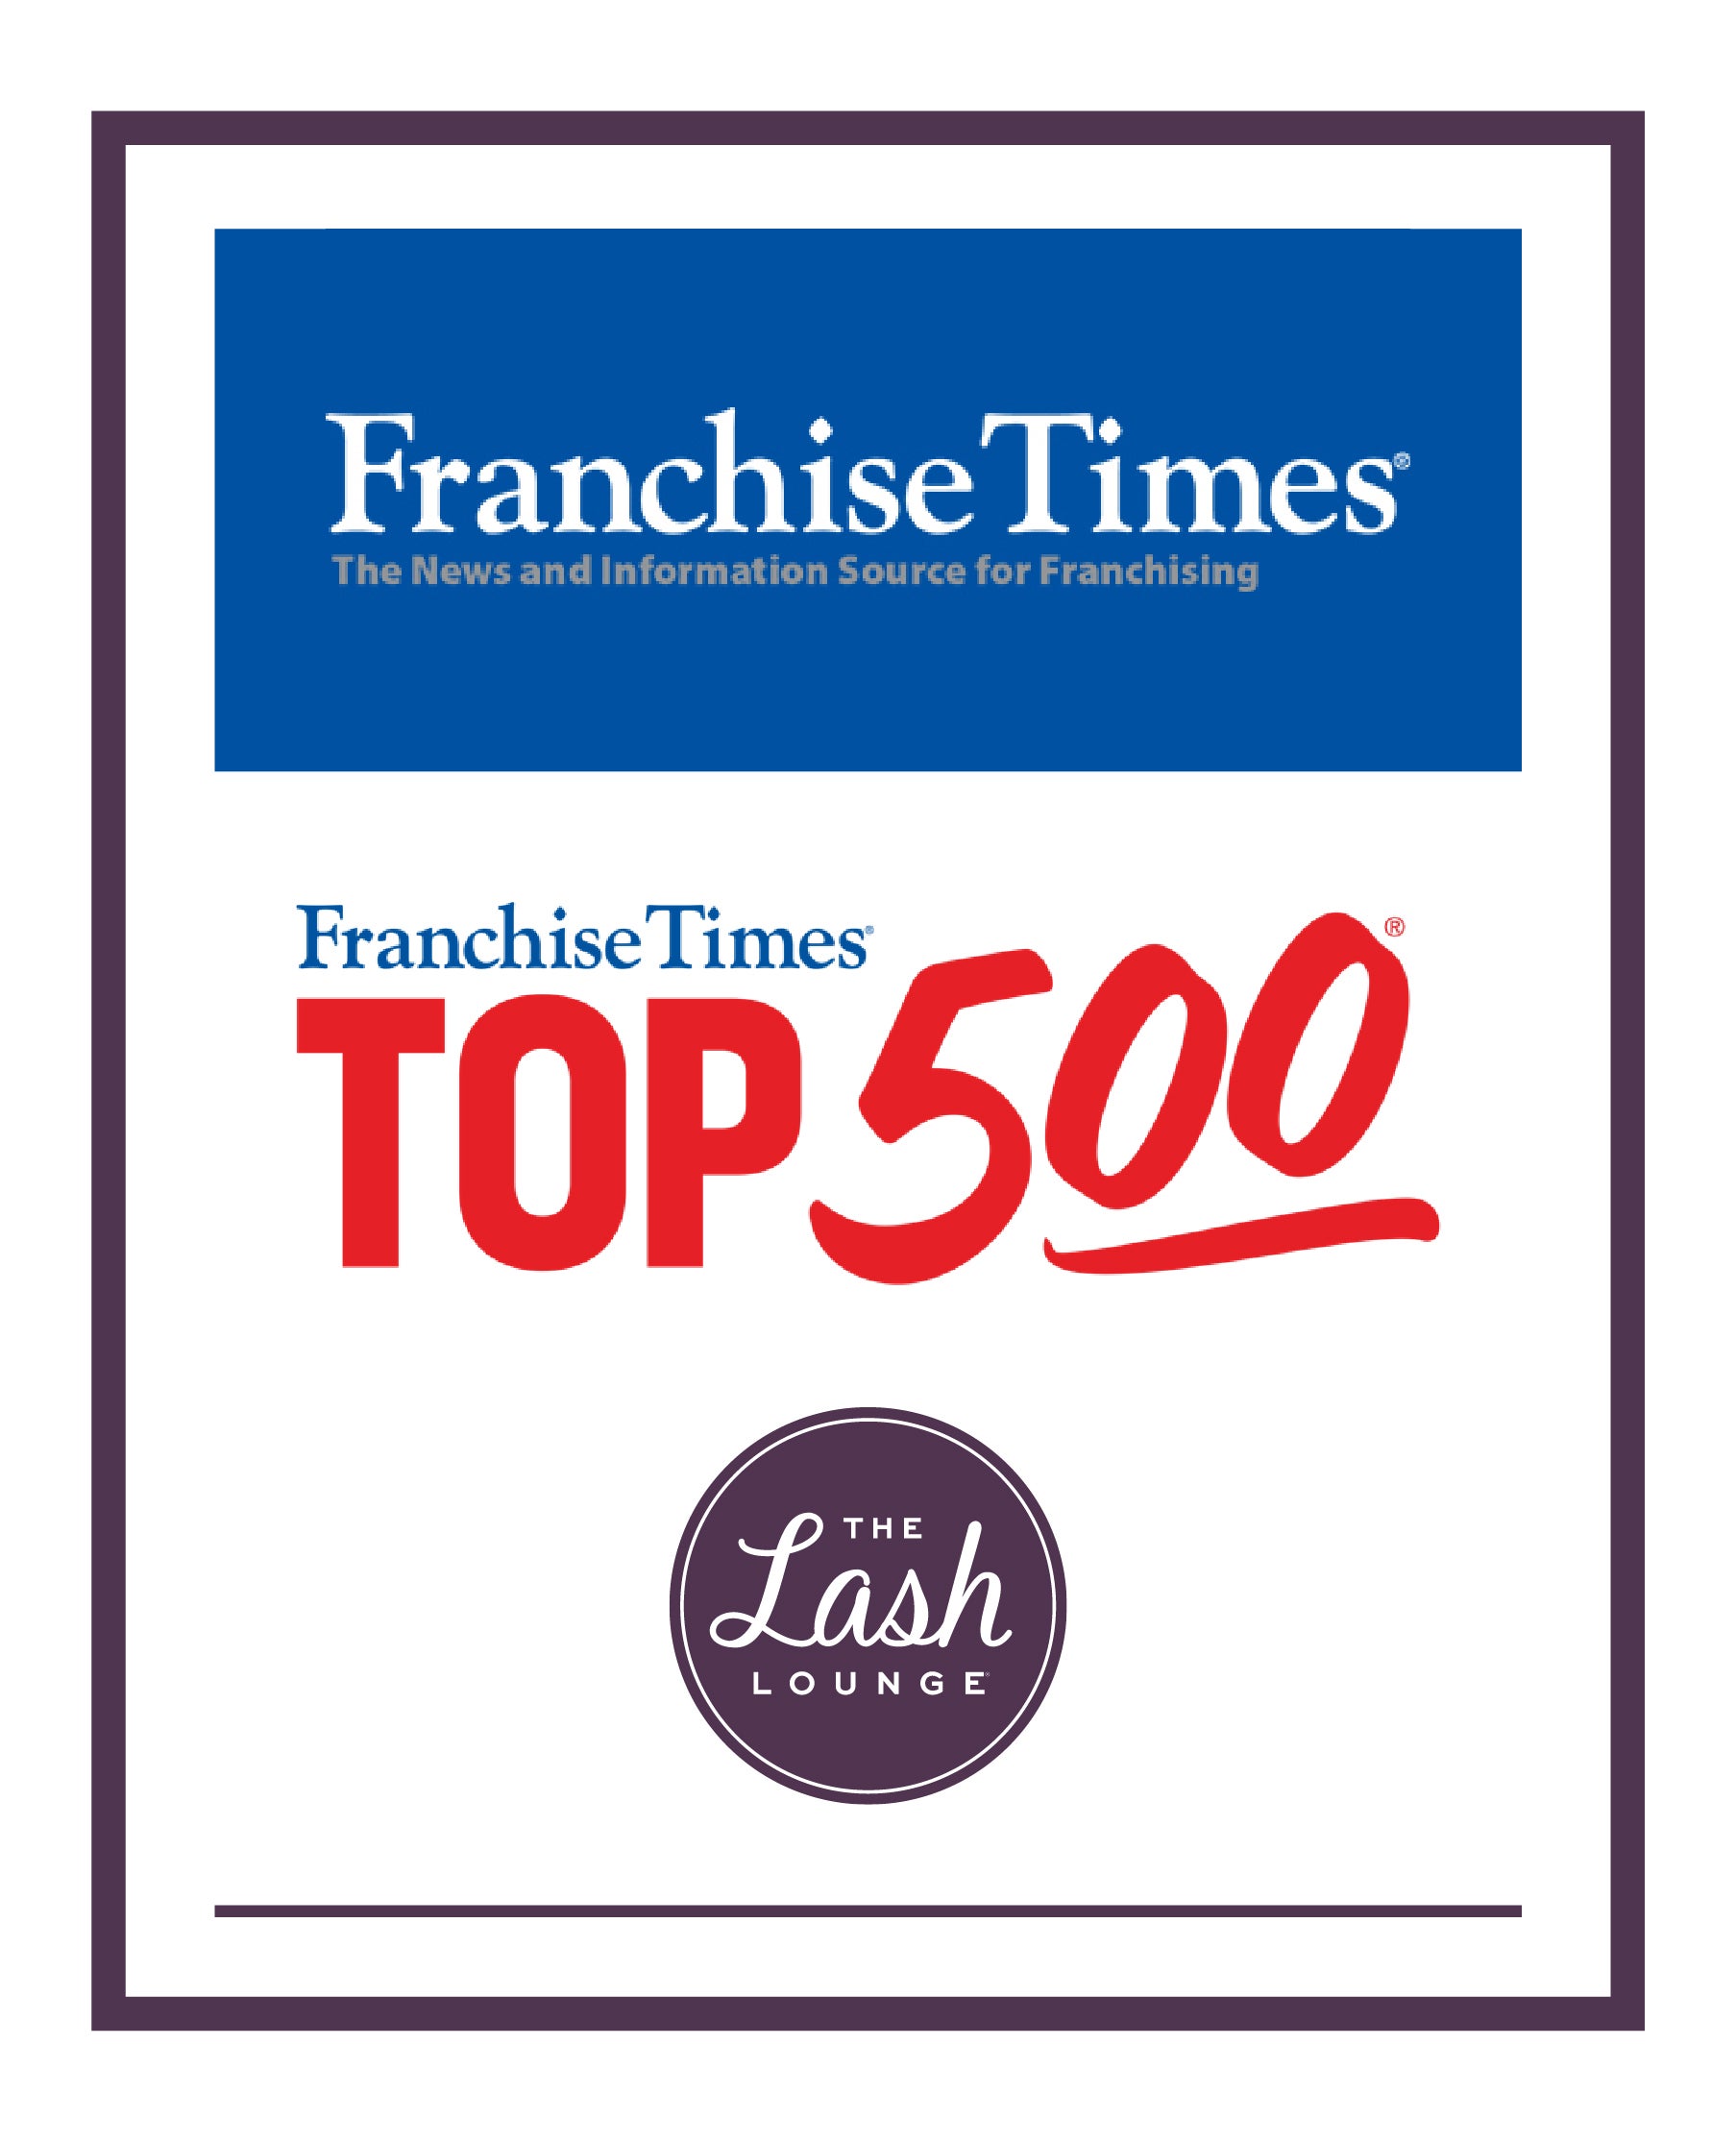 Franchise times top 500